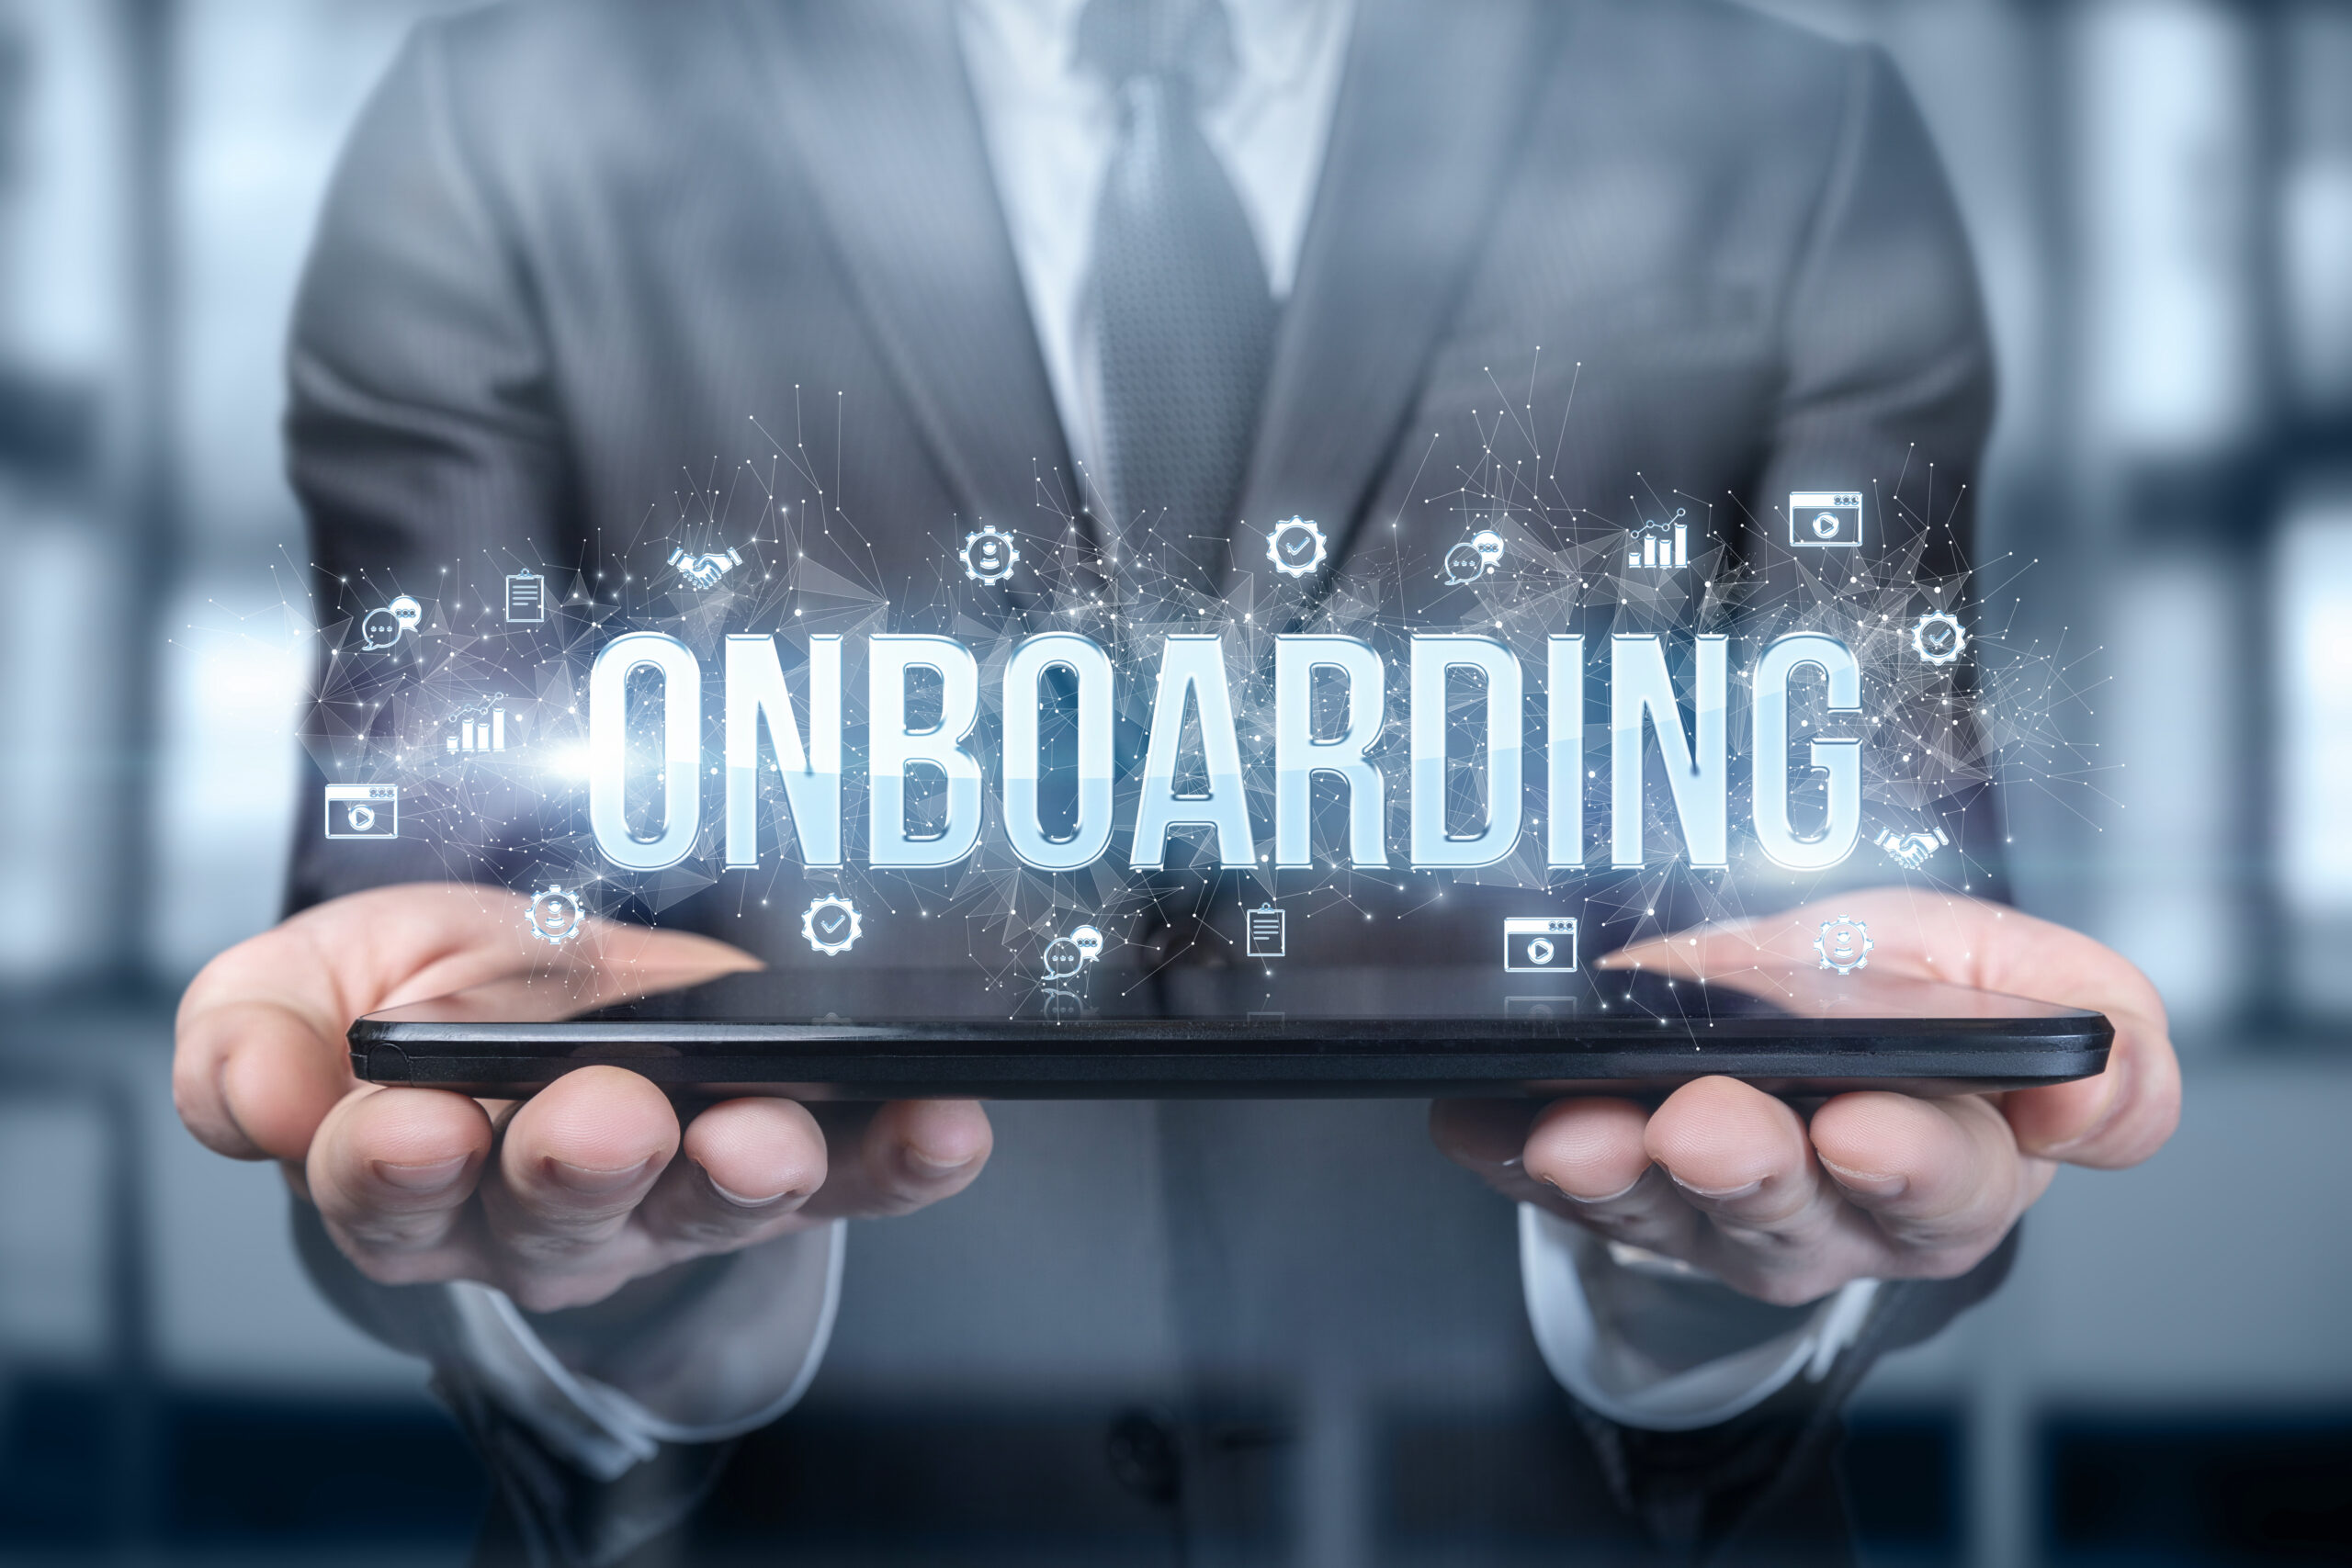 Onboarding-Digital-Image-Floats-Above-Tablet-held-By-Man-In-A-Business-Suit